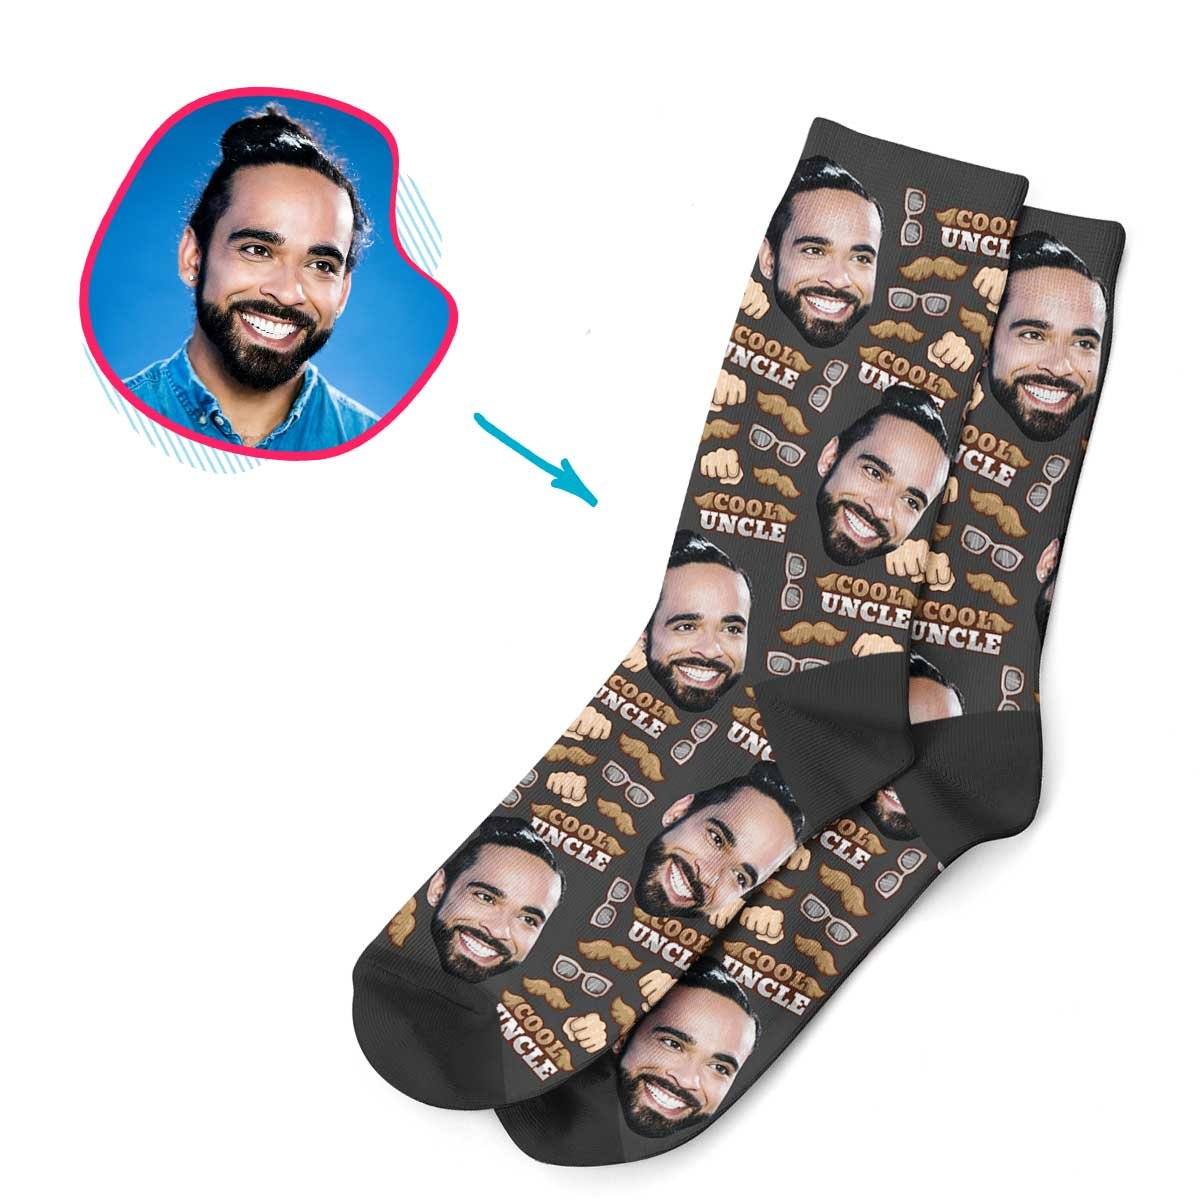 Dark Uncle personalized socks with photo of face printed on them